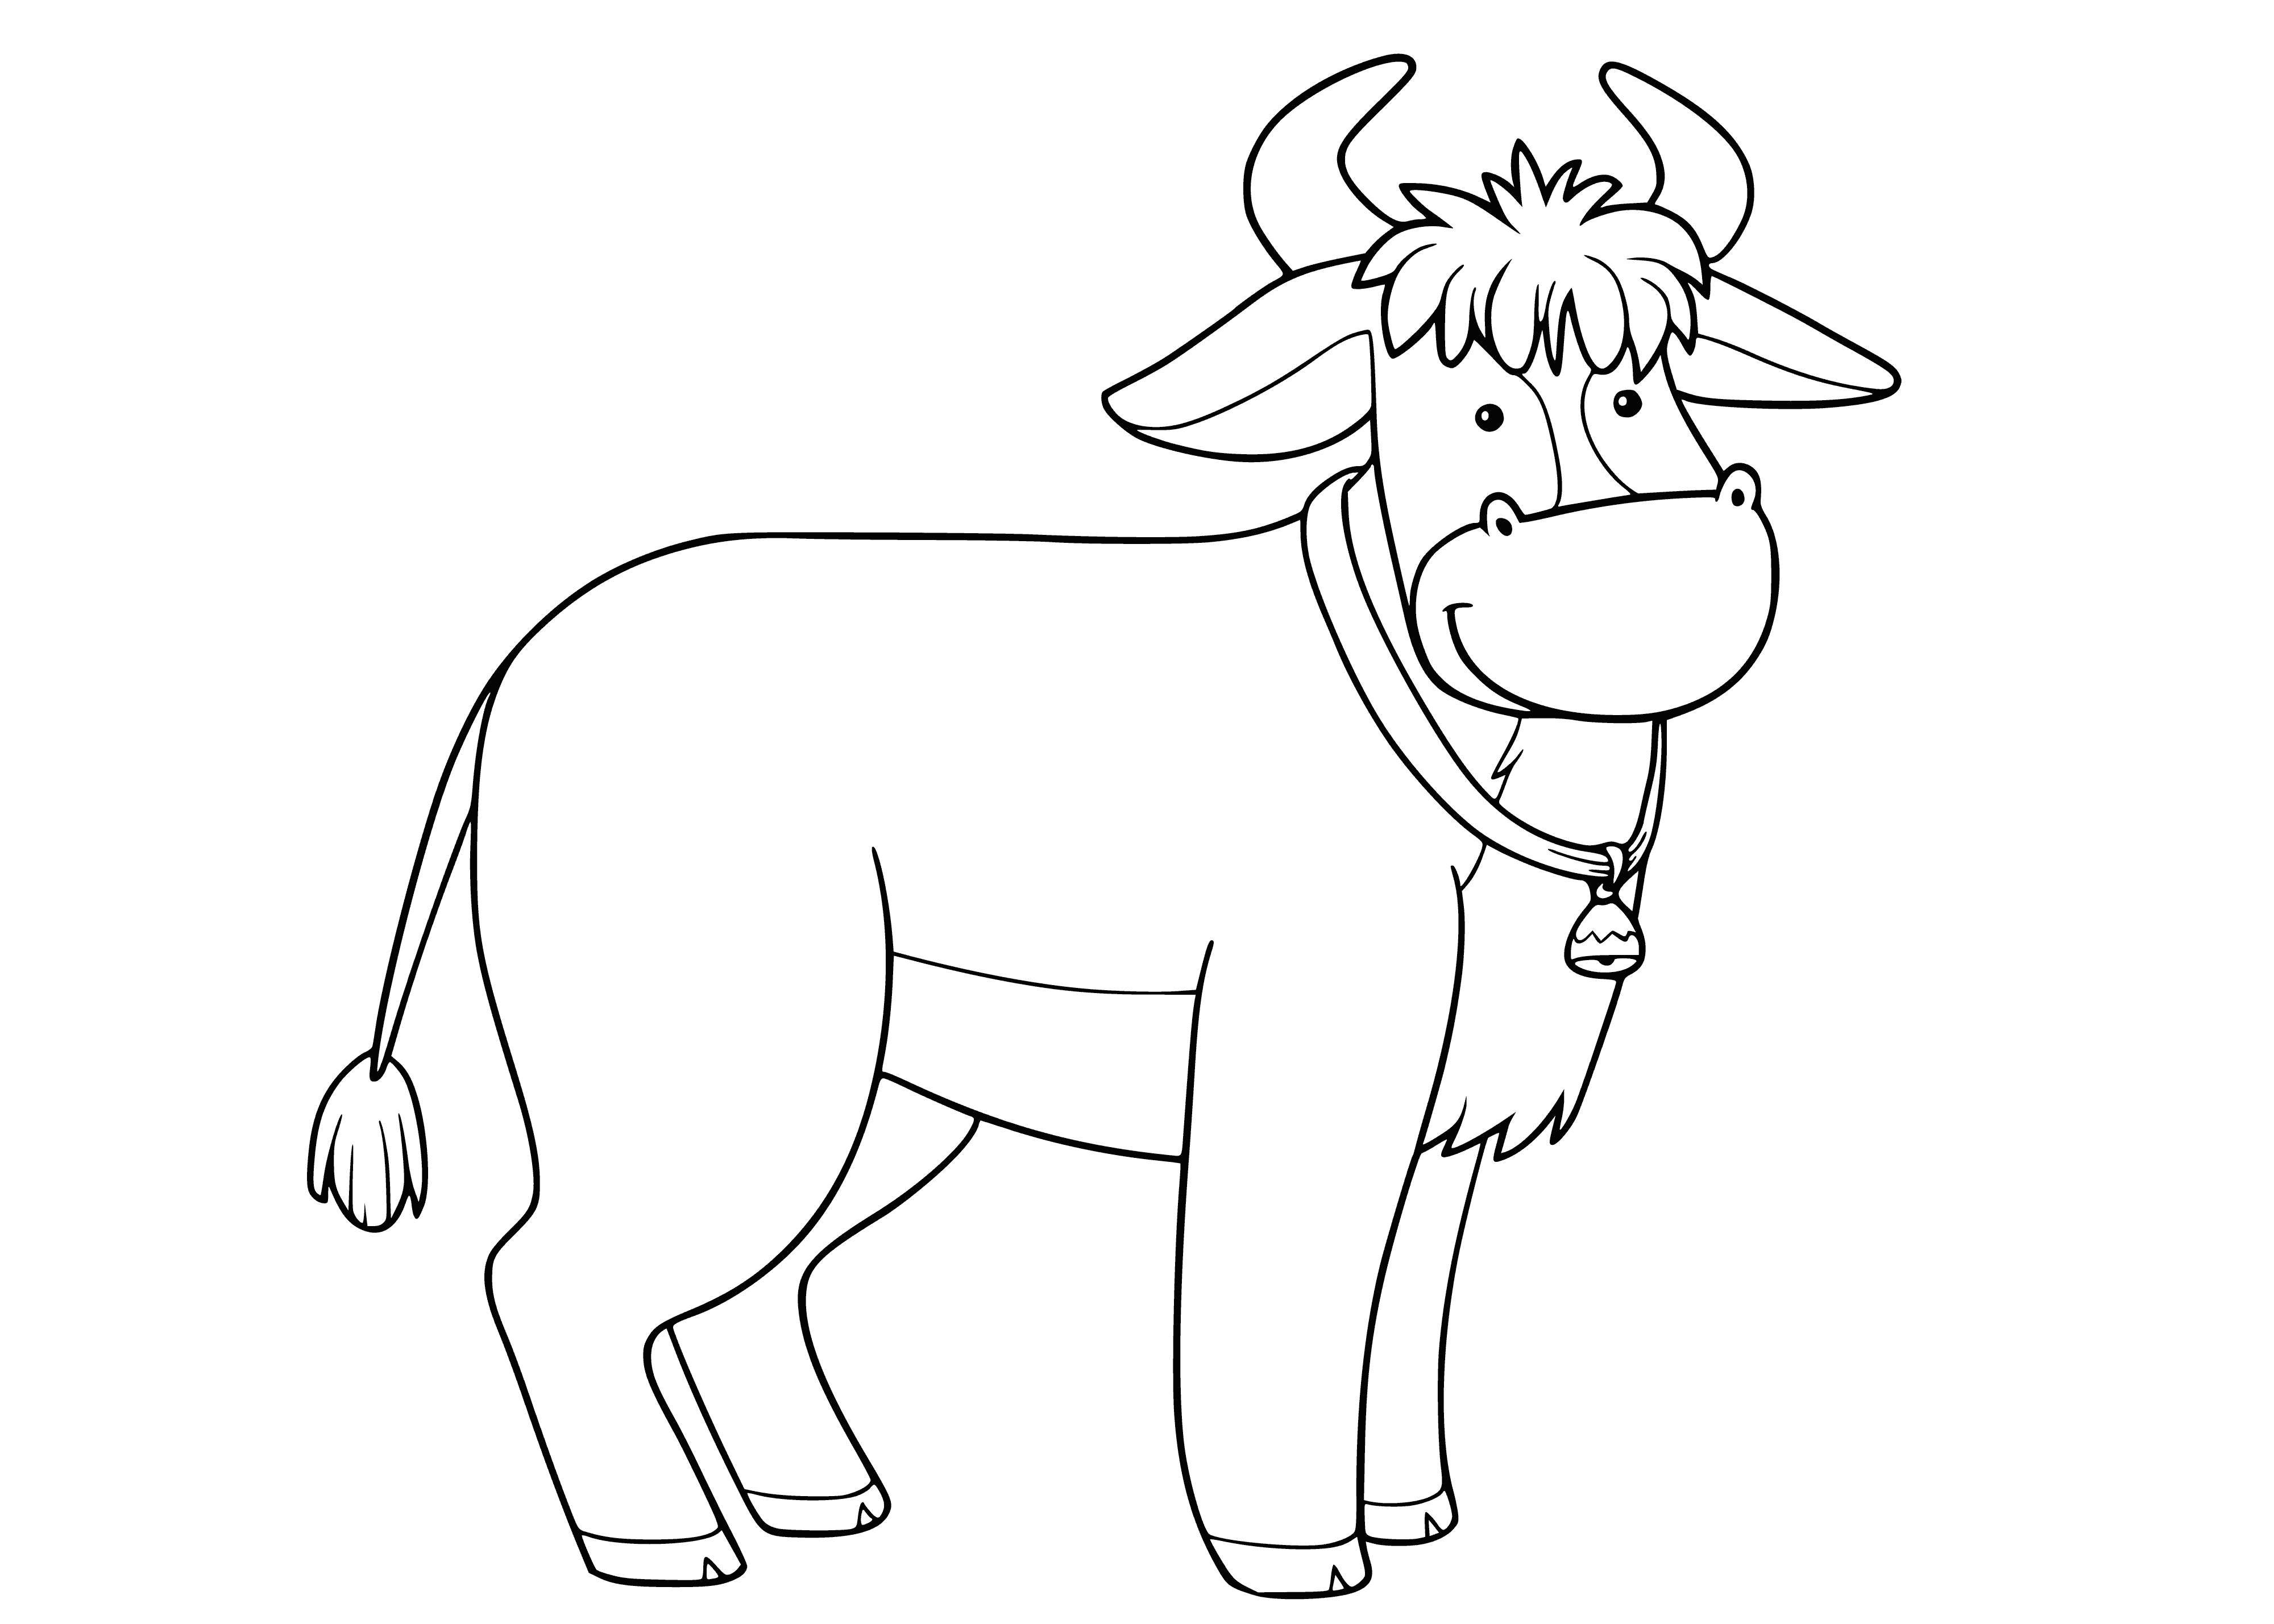 coloring page: Symbol of 2021: Powerful bull with a short coat of white & black fur, curved horns, & long tail - often used for work like plowing & transporting goods.